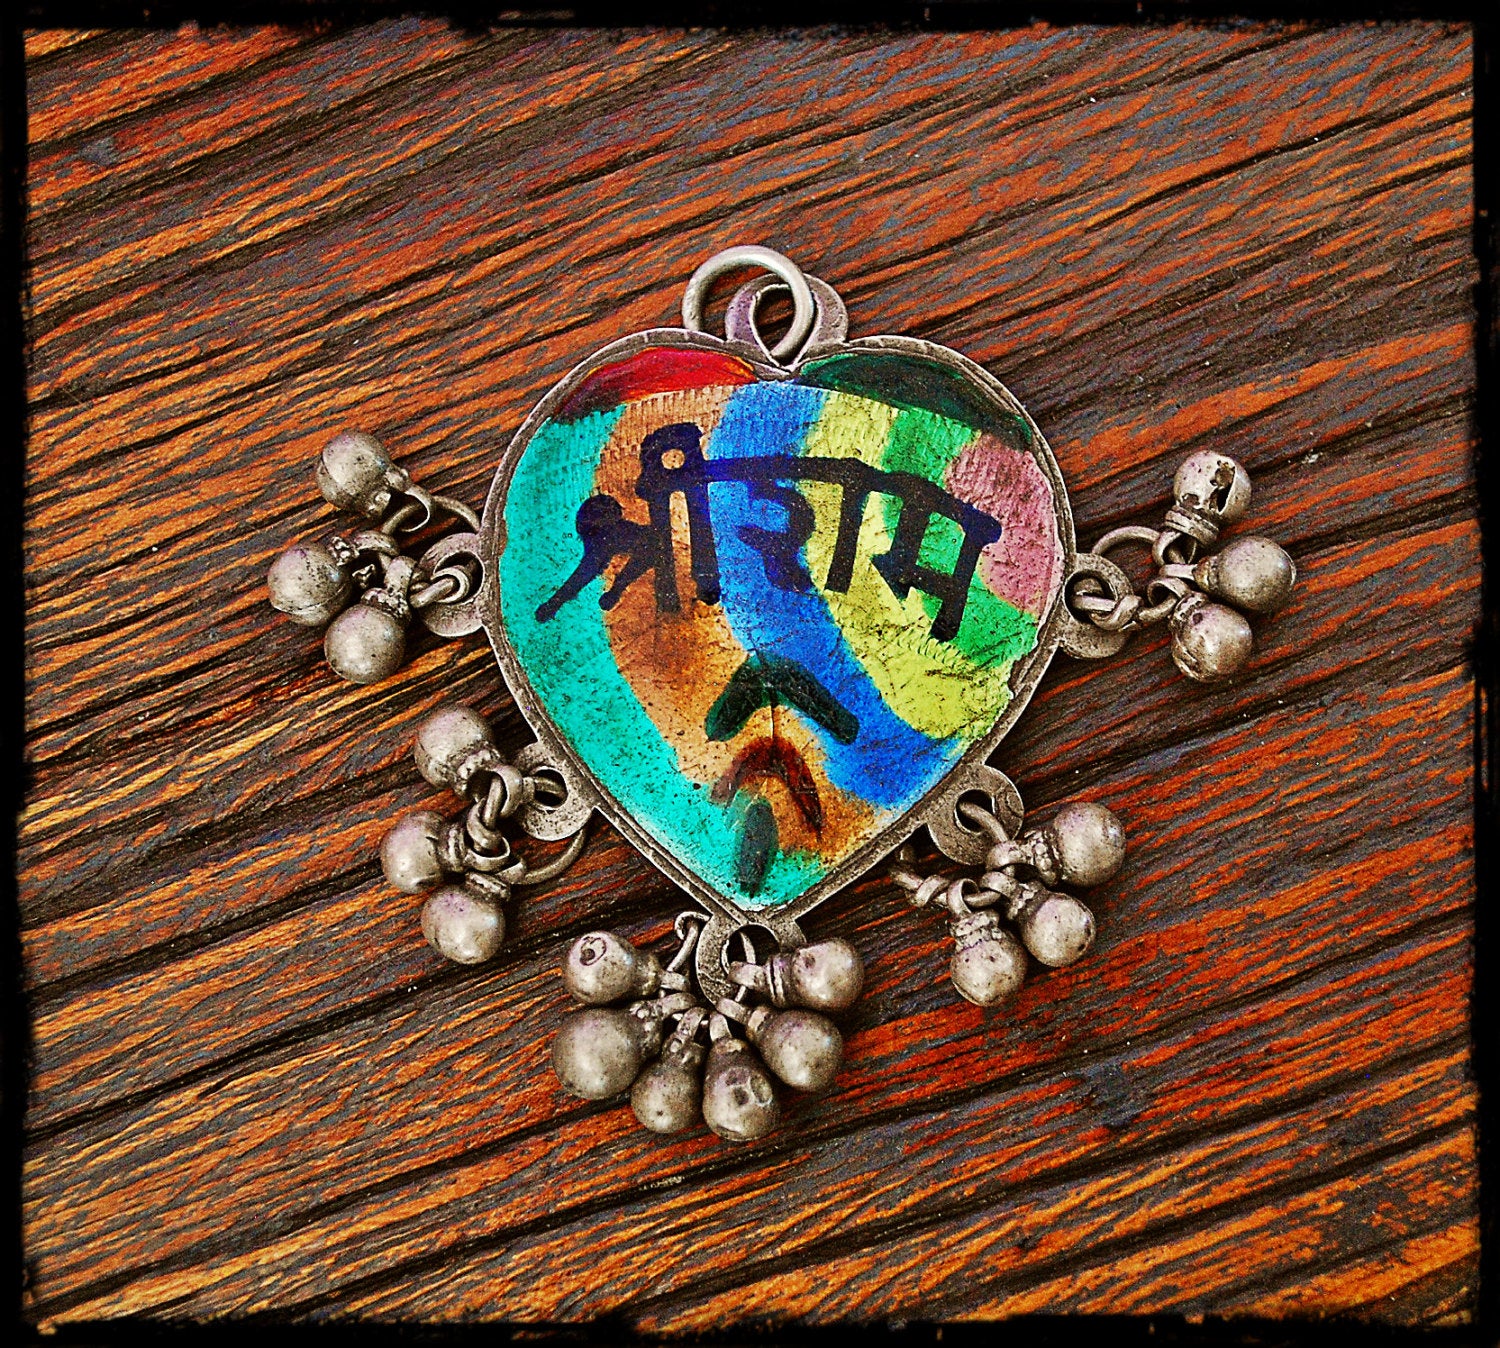 Tribal Indian Pendant with Bells